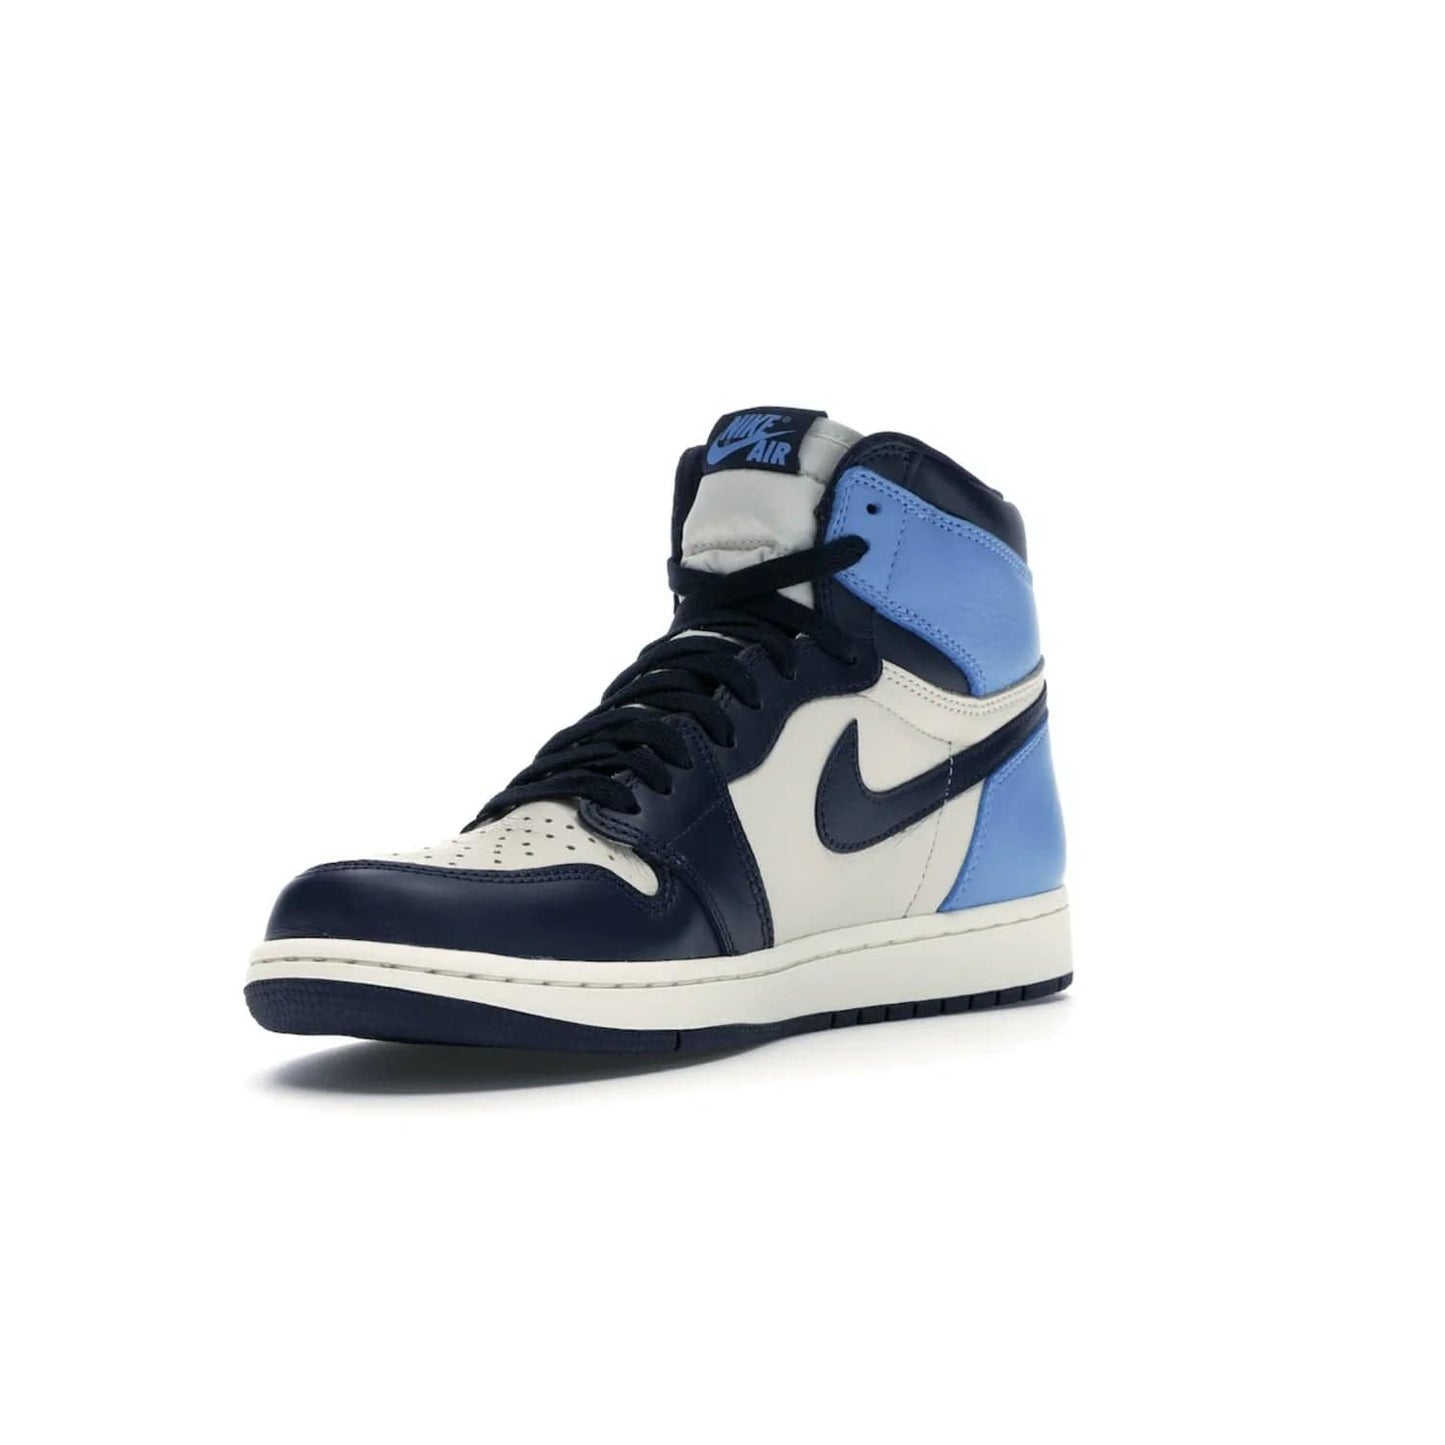 Jordan 1 Retro High Obsidian UNC - Image 14 - Only at www.BallersClubKickz.com - Bring a timeless classic to your wardrobe with the Air Jordan 1 Retro High "Obsidian/University Blue”. A full leather upper combines Obsidian and University Blue detailing for a retro Jordan style. Stitched Jumpman logo pays tribute to UNC. Experience classic style with a timeless sneaker.